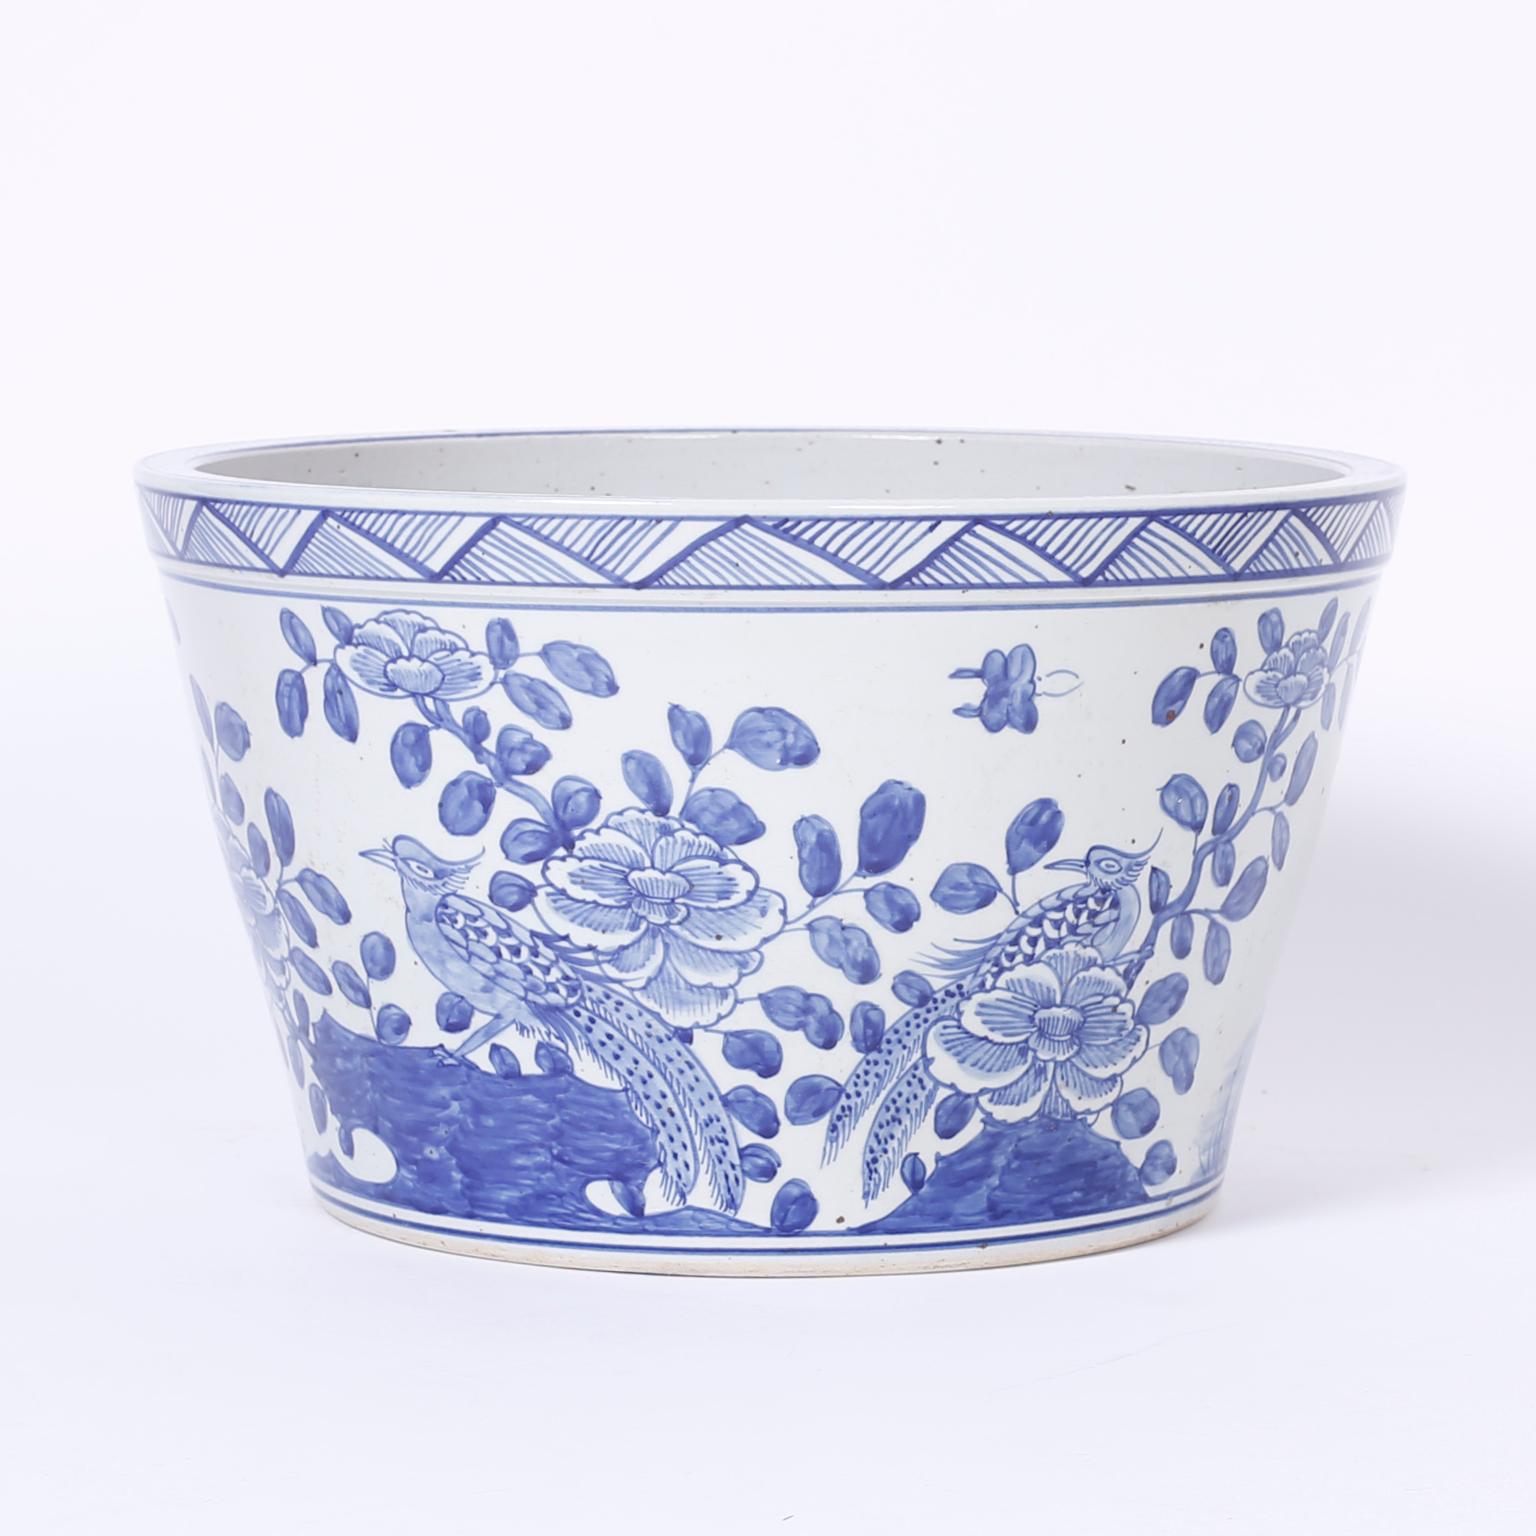 Chinese blue and white porcelain tapered bowl or planter decorated with peacocks and flowers on the fronts and bamboo shoots on the backsides, in the Chinese Export manner.